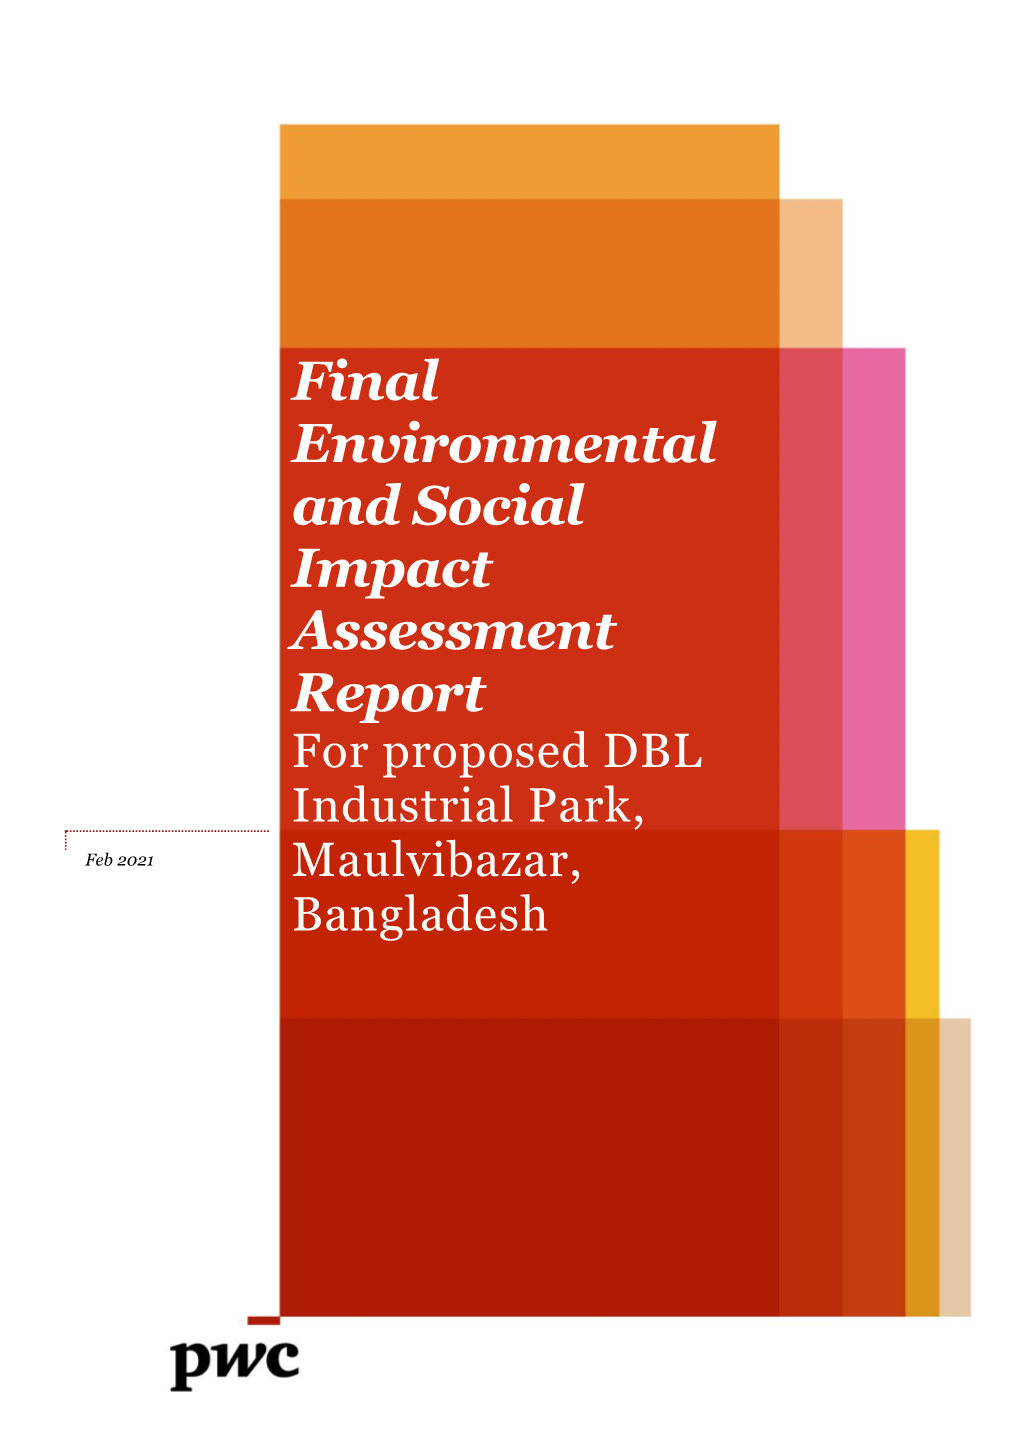 Final Environmental and Social Impact Assessment Report for Proposed DBL Industrial Park